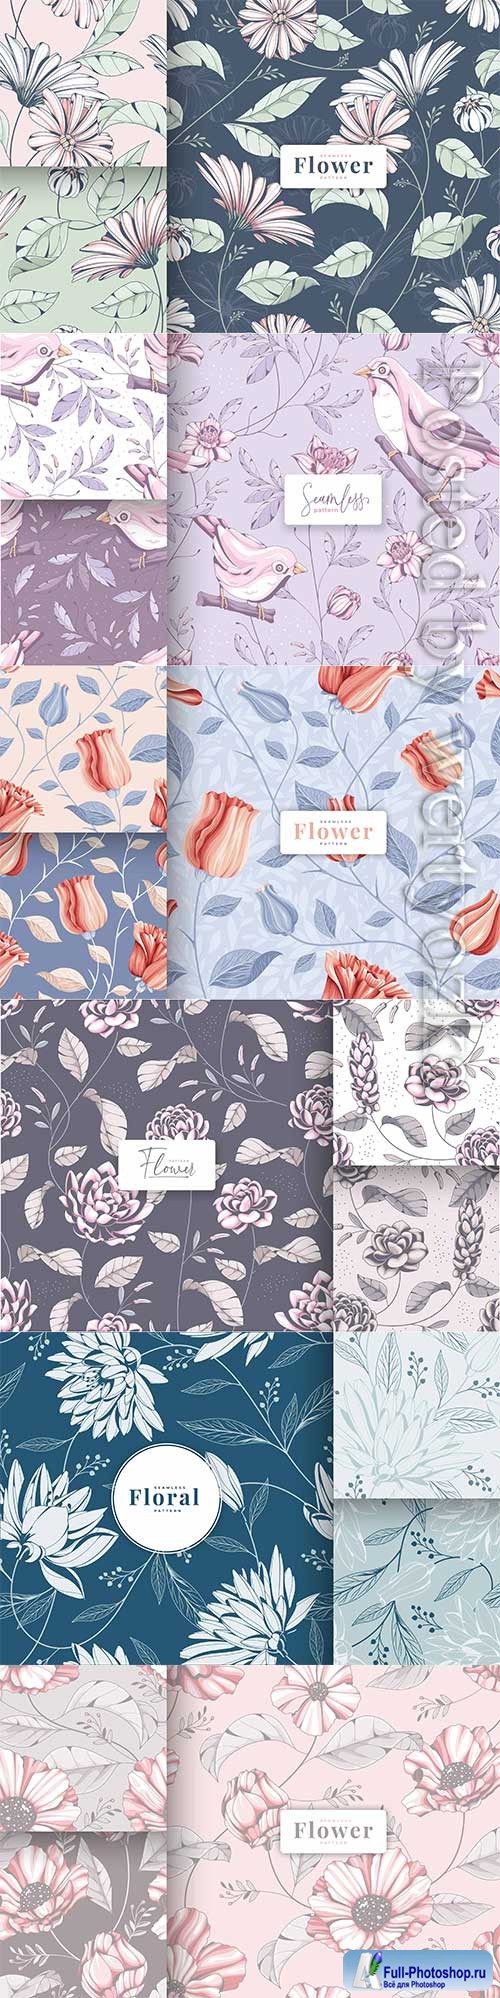 Vector hand drawn vintage floral seamless pattern